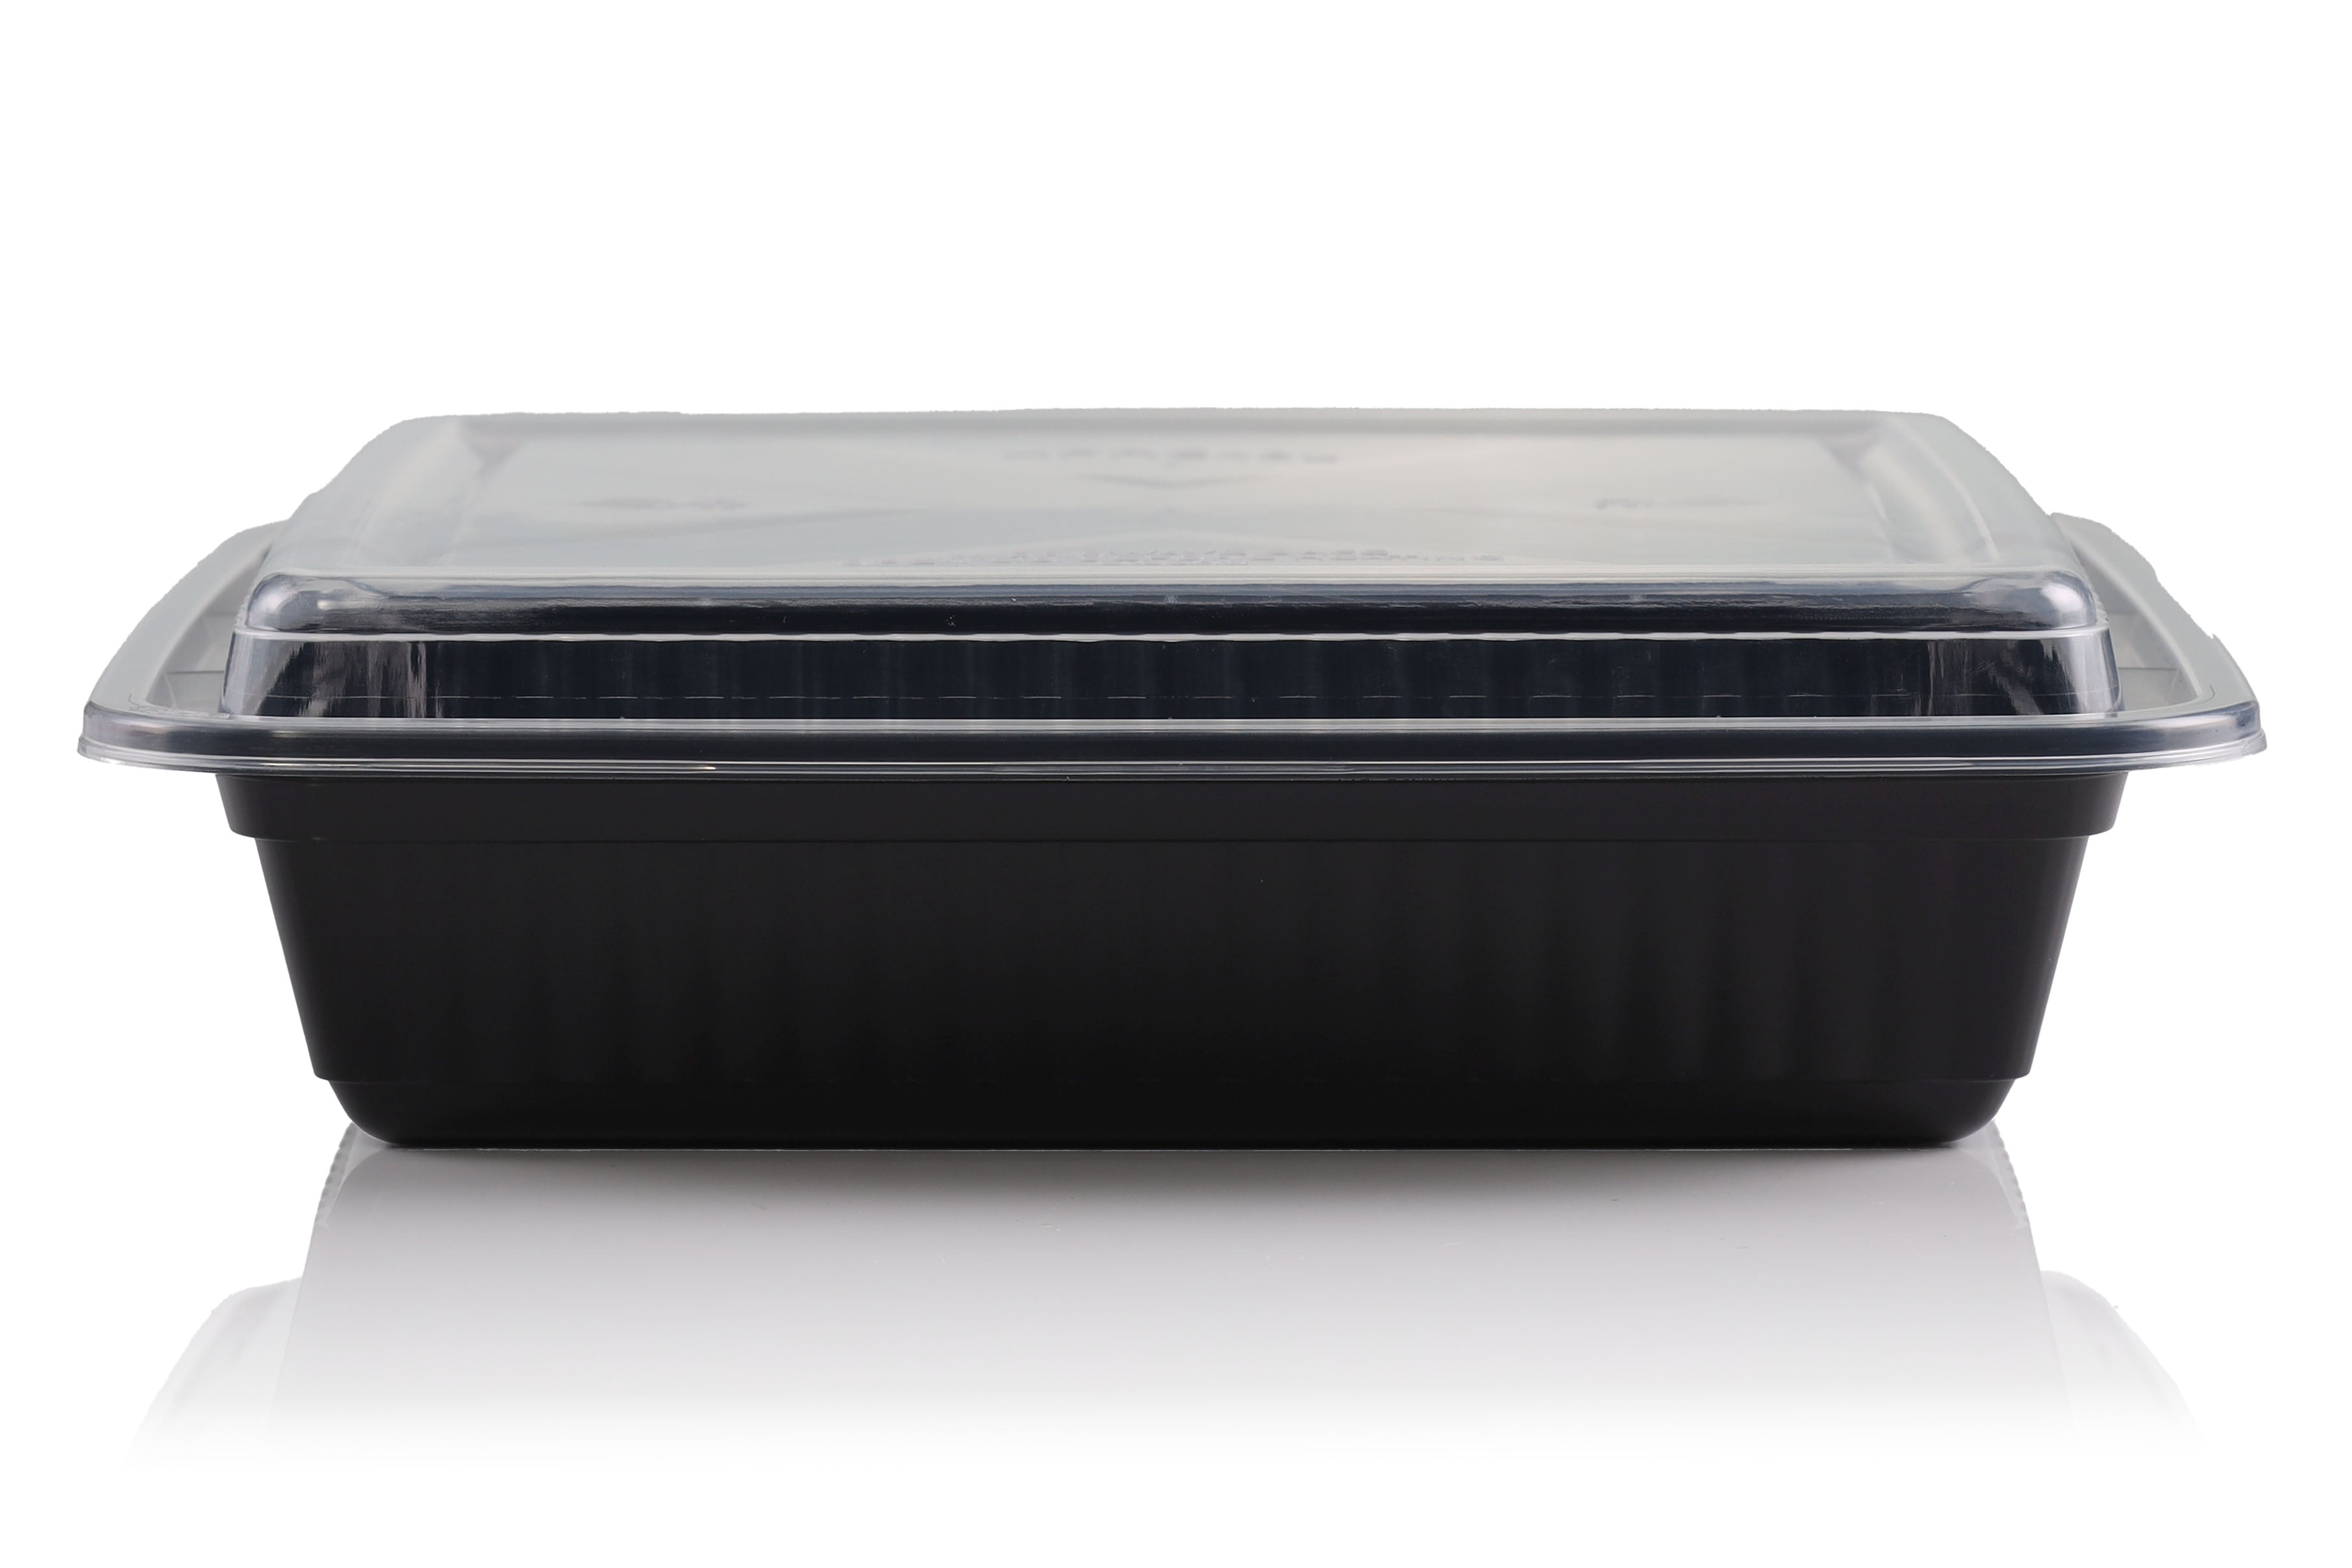  BWS 12 oz. Black 6 x 4 3/4 x 1 3/4 Rectangular Microwavable  Heavyweight Meal Prep Containers with Lids, Case of 150